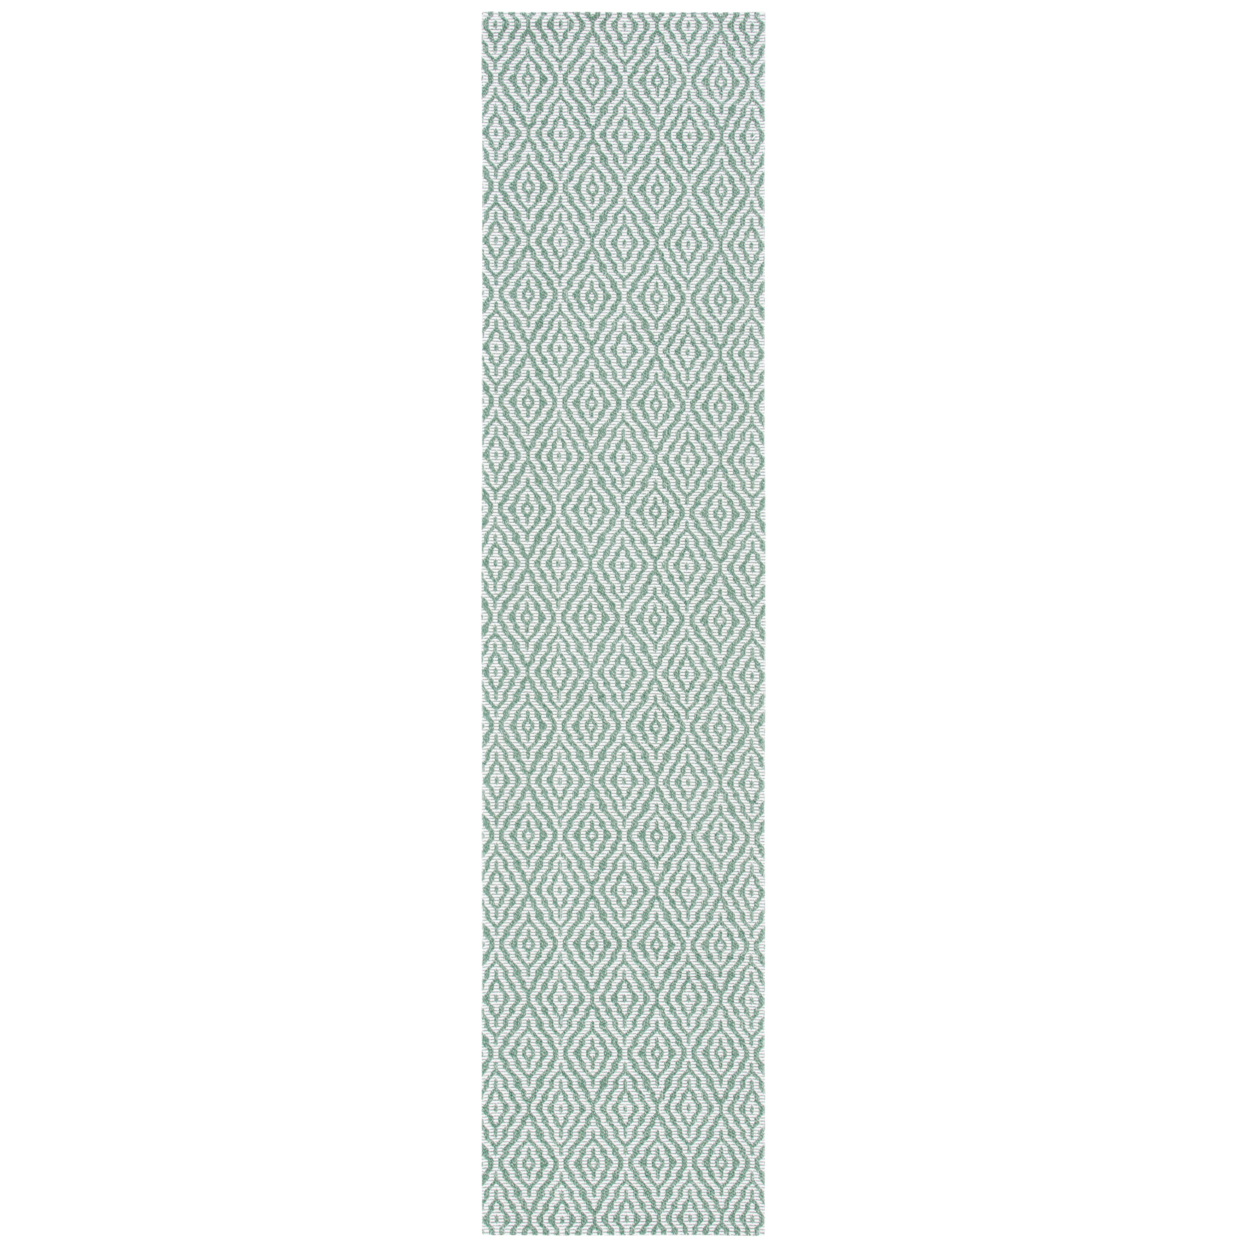 SAFAVIEH Augustine Collection AGT484Y Green / Ivory Rug - 9' X 12'